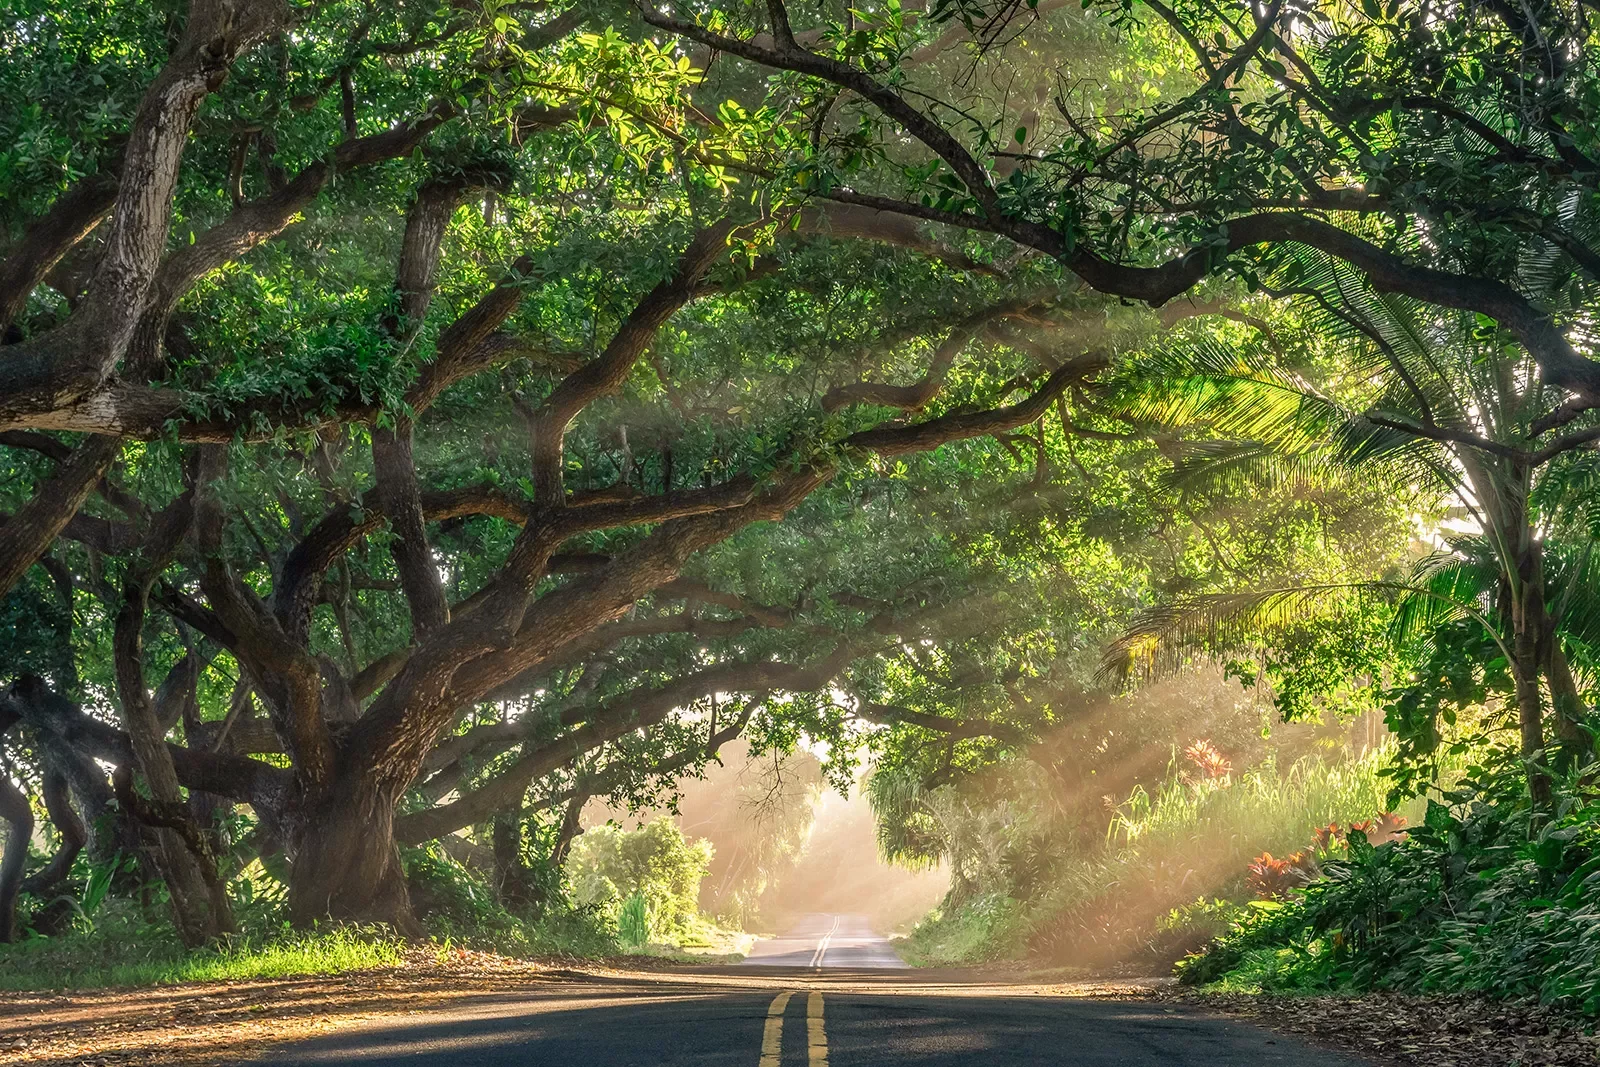 Road running through a shaded forest in Hawaii